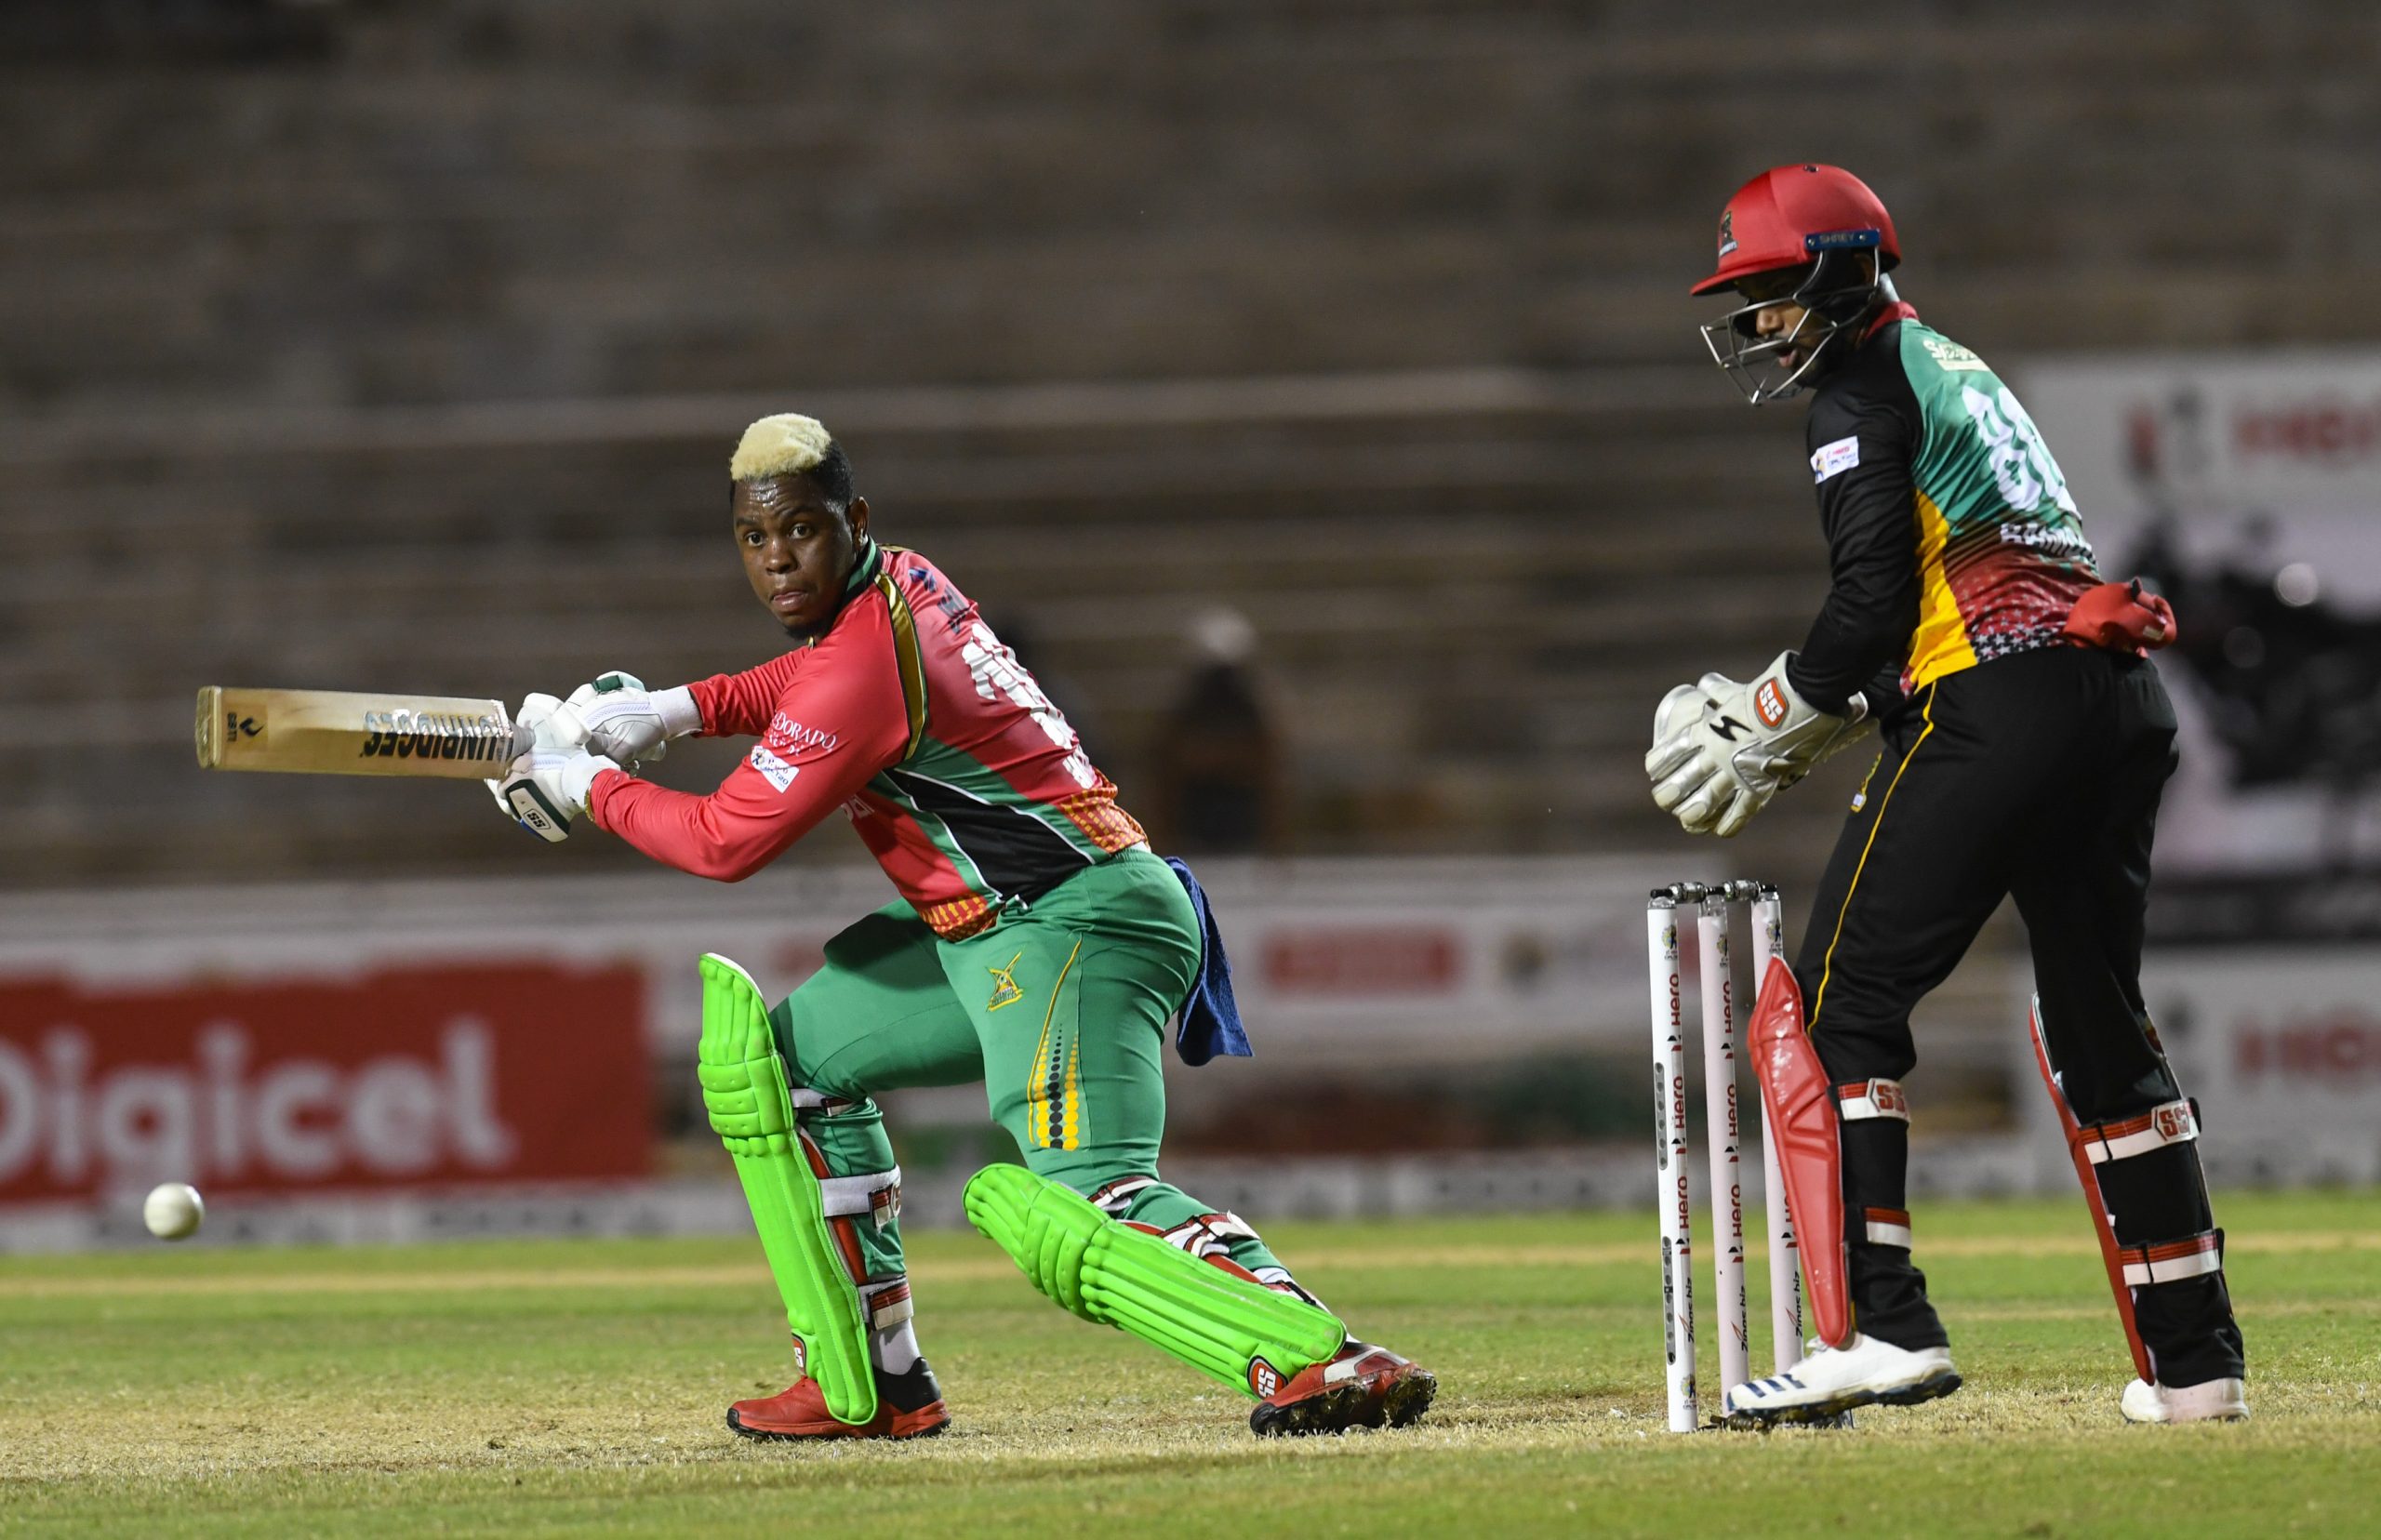 Shimron Hetmyer (L) of Guyana Amazon Warriors plays the cut shot as Denesh Ramdin (R) St Kitts & Nevis Patriots watches on (Photo by Randy Brooks - CPL T20/CPL T20 via Getty Images)